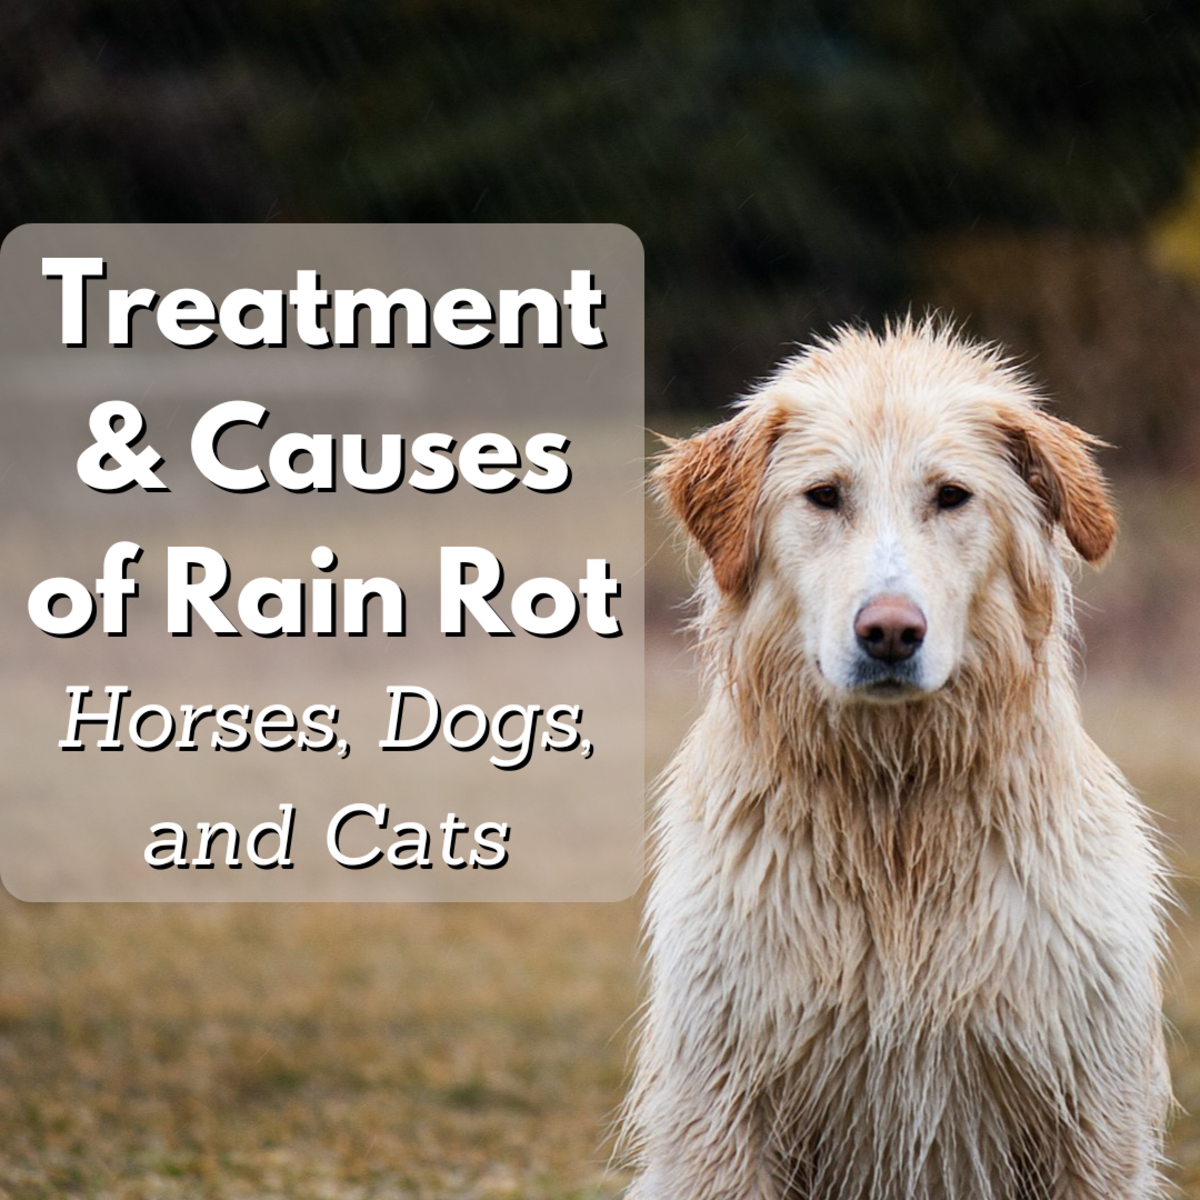 Have you ever witnessed rain rot in dogs? What about horses or cats? It's not a pretty sight. In this article, you'll learn about rain rot and how to best prevent and treat it.